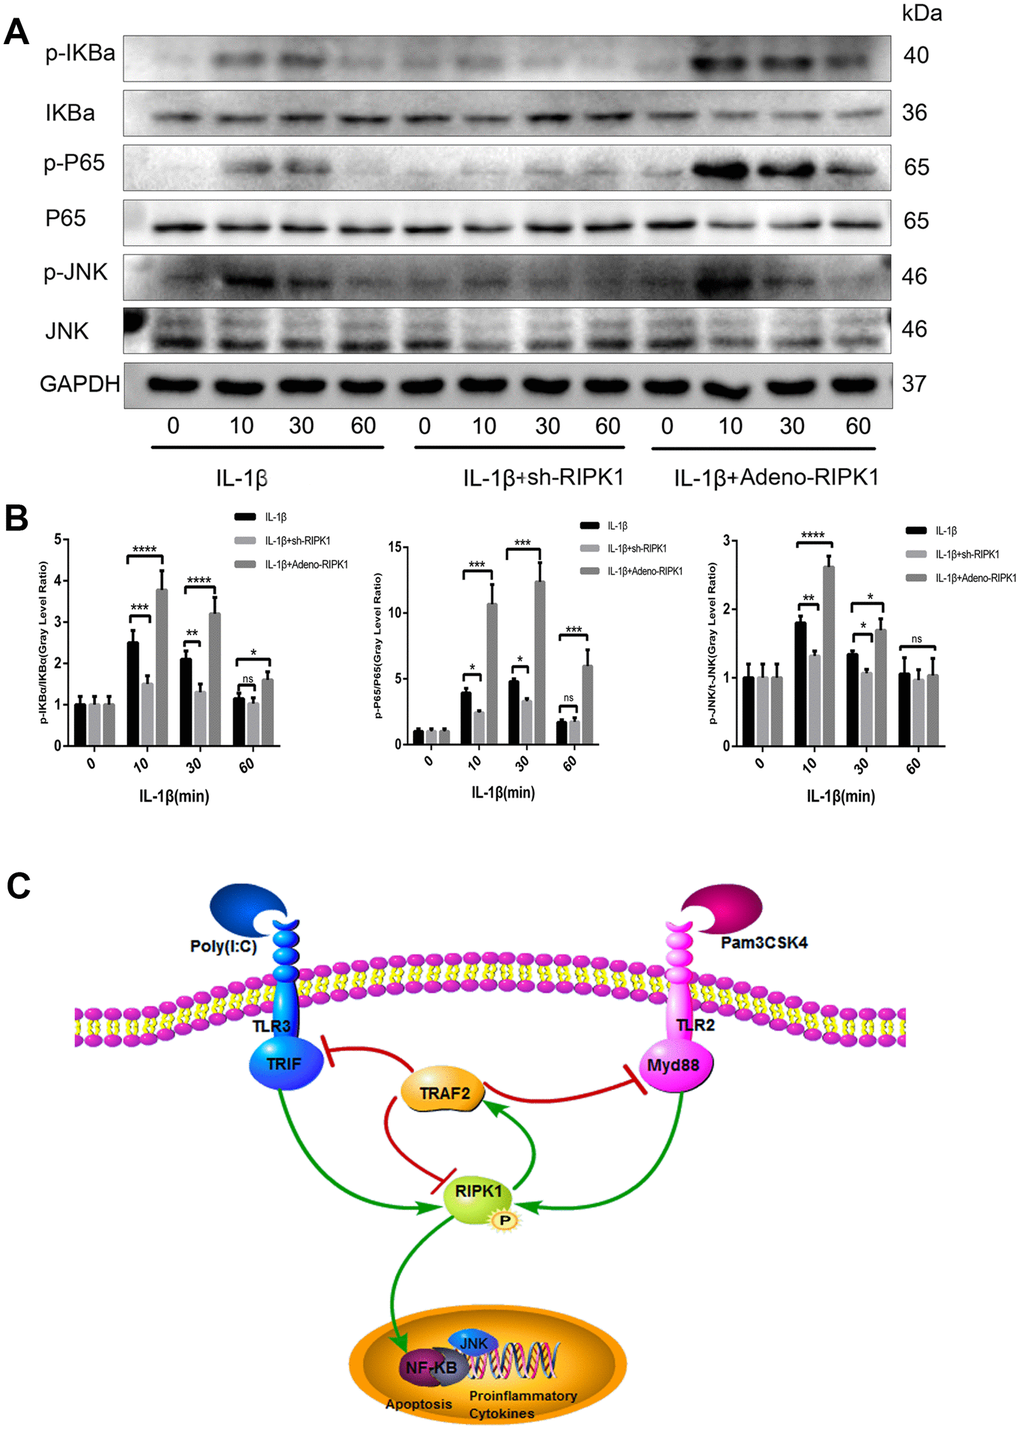 c-Jun N-terminal kinase (JNK) and nuclear factor-κB (NF-κB) are involved in RIPK1-mediated inflammation. (A, B) Expression levels of p-JNK, p-IKBα, and p-P65 in chondrocytes. The experiments were repeated three times independently. Columns represent means ± SD. *p 